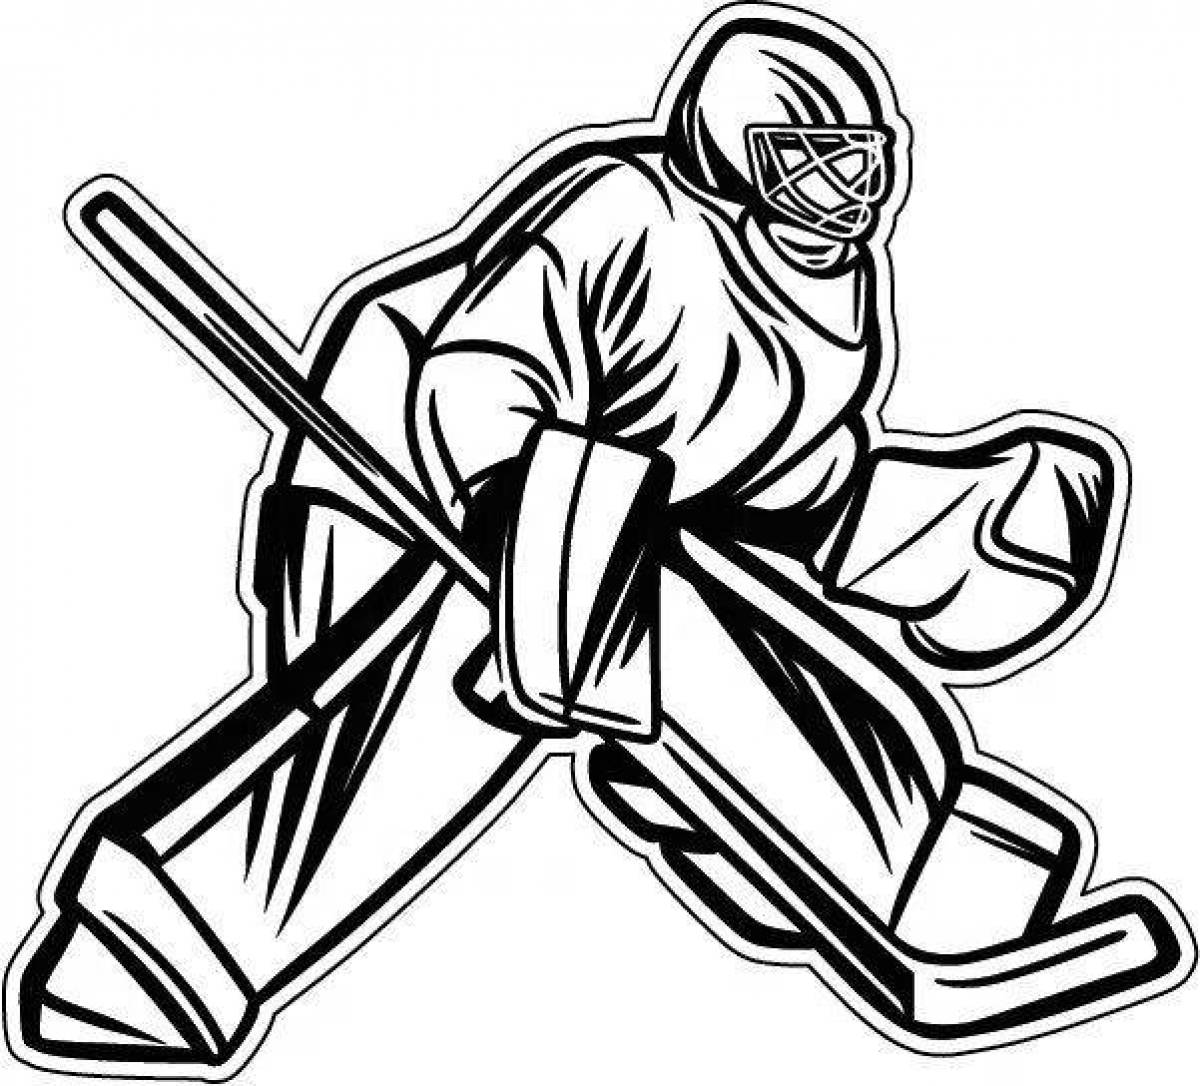 Coloring page playful hockey goalie